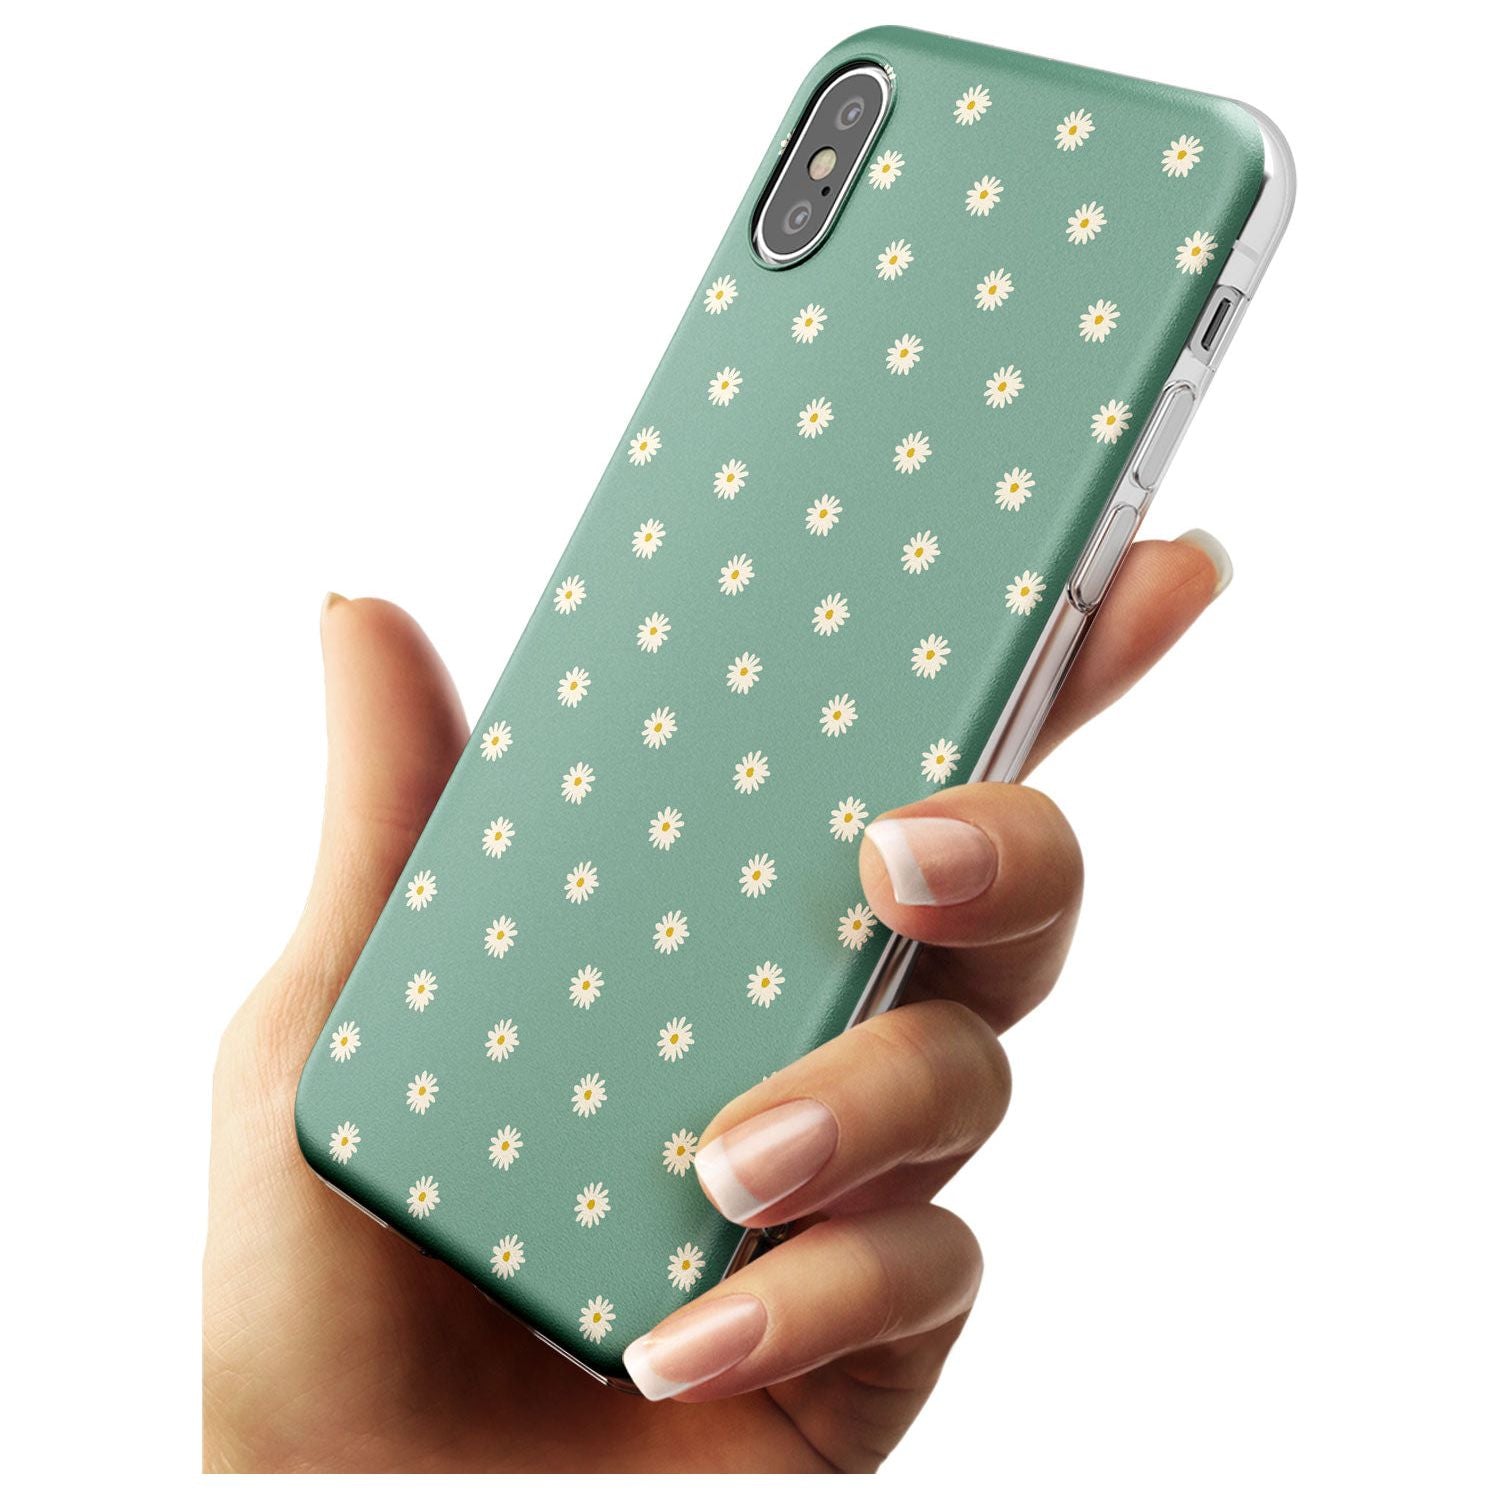 Daisy Pattern - Teal Cute Floral Daisy Design Black Impact Phone Case for iPhone X XS Max XR